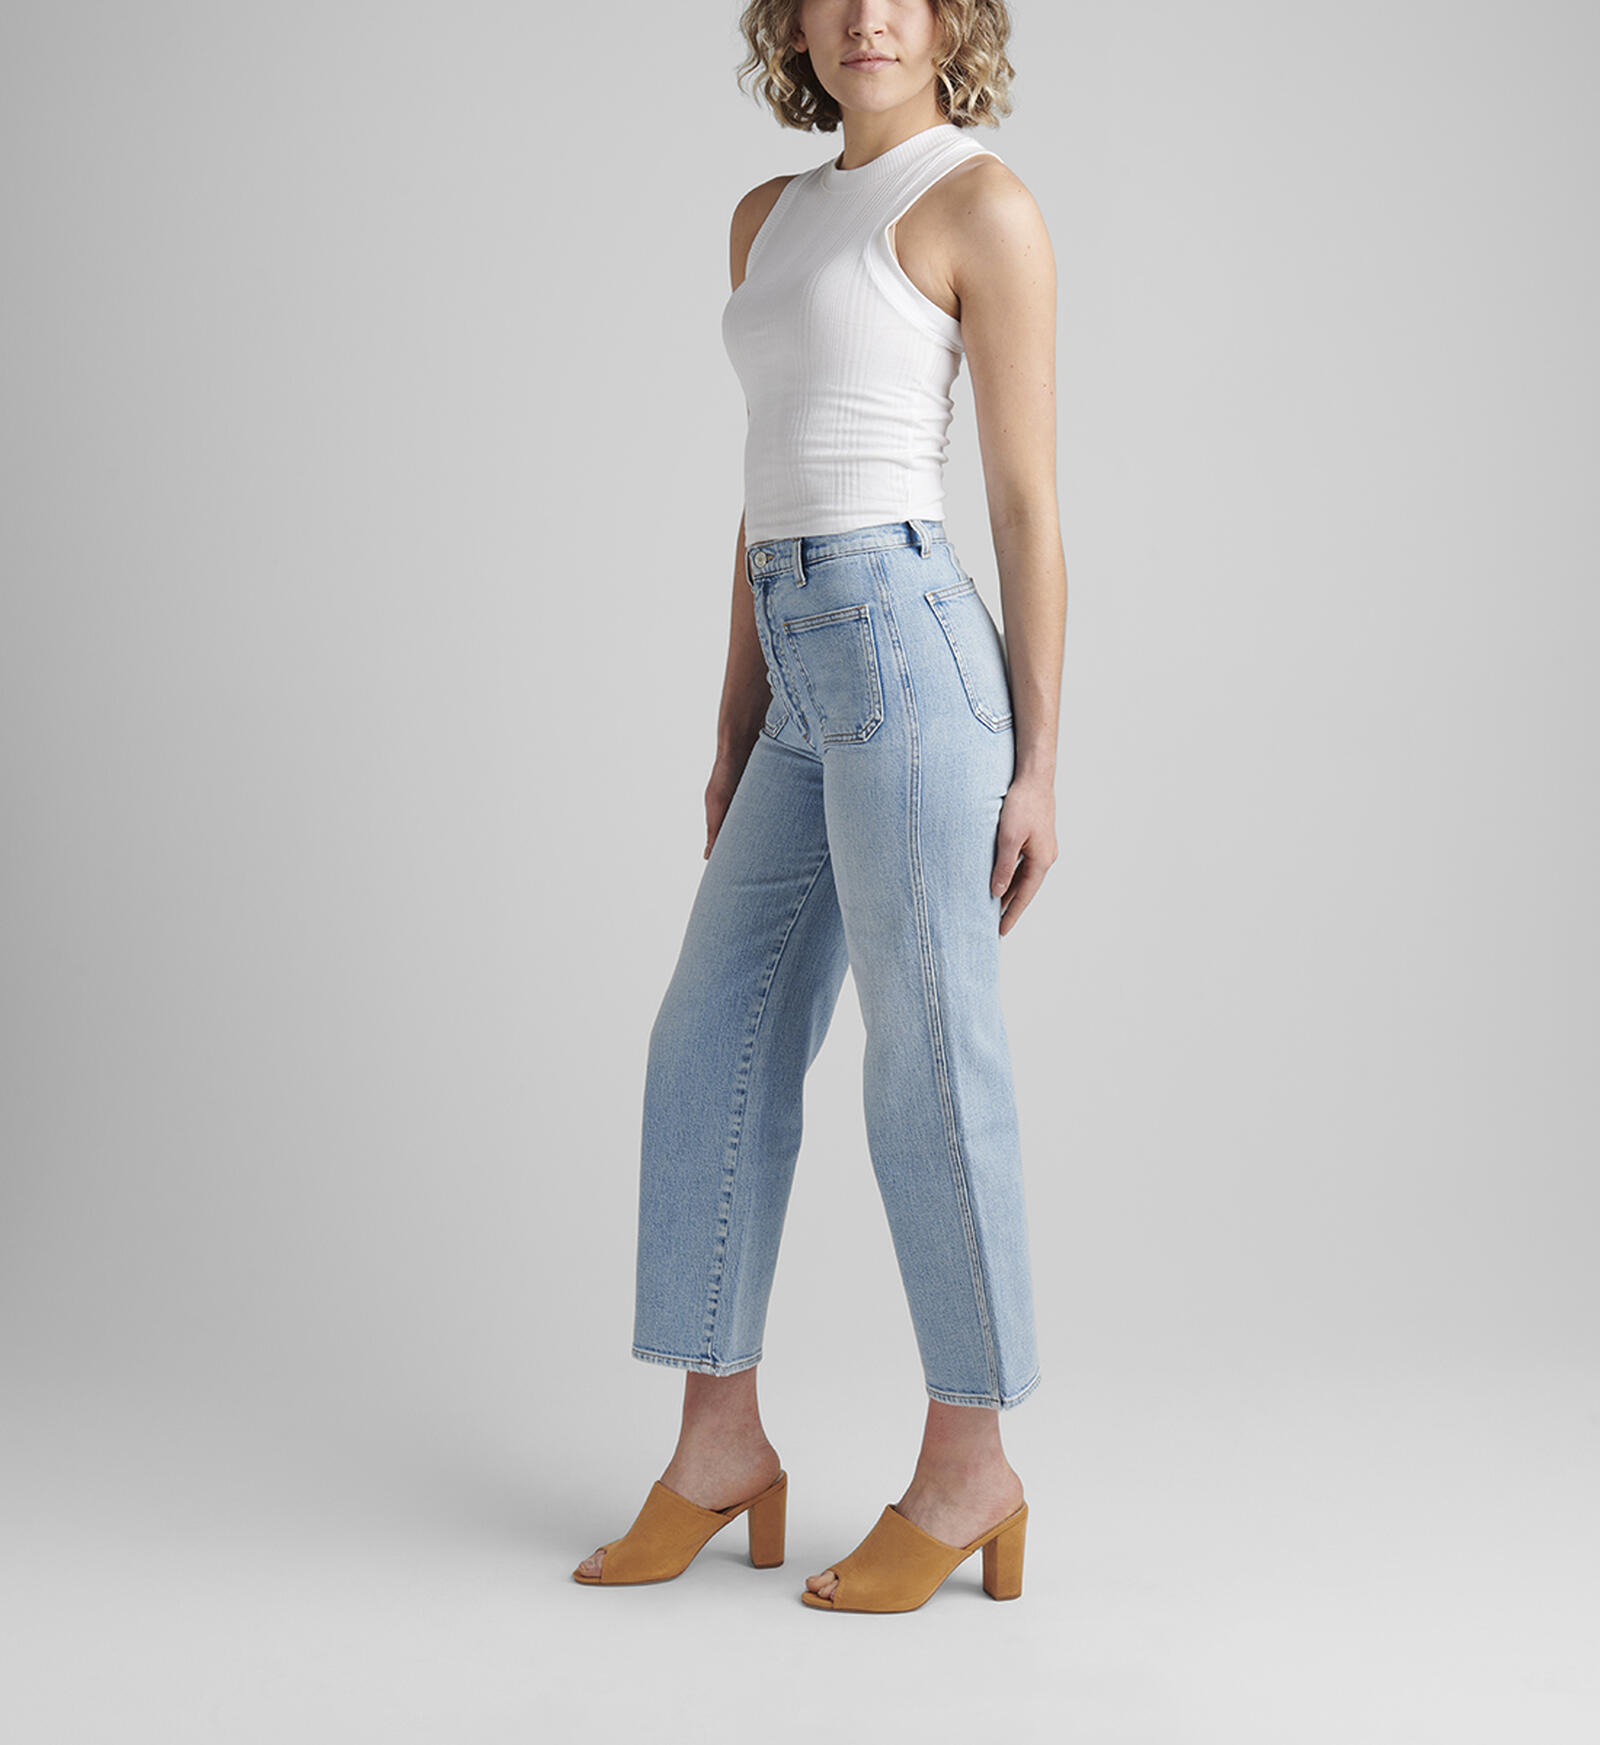 Star Patched Wide Leg Jean Pants